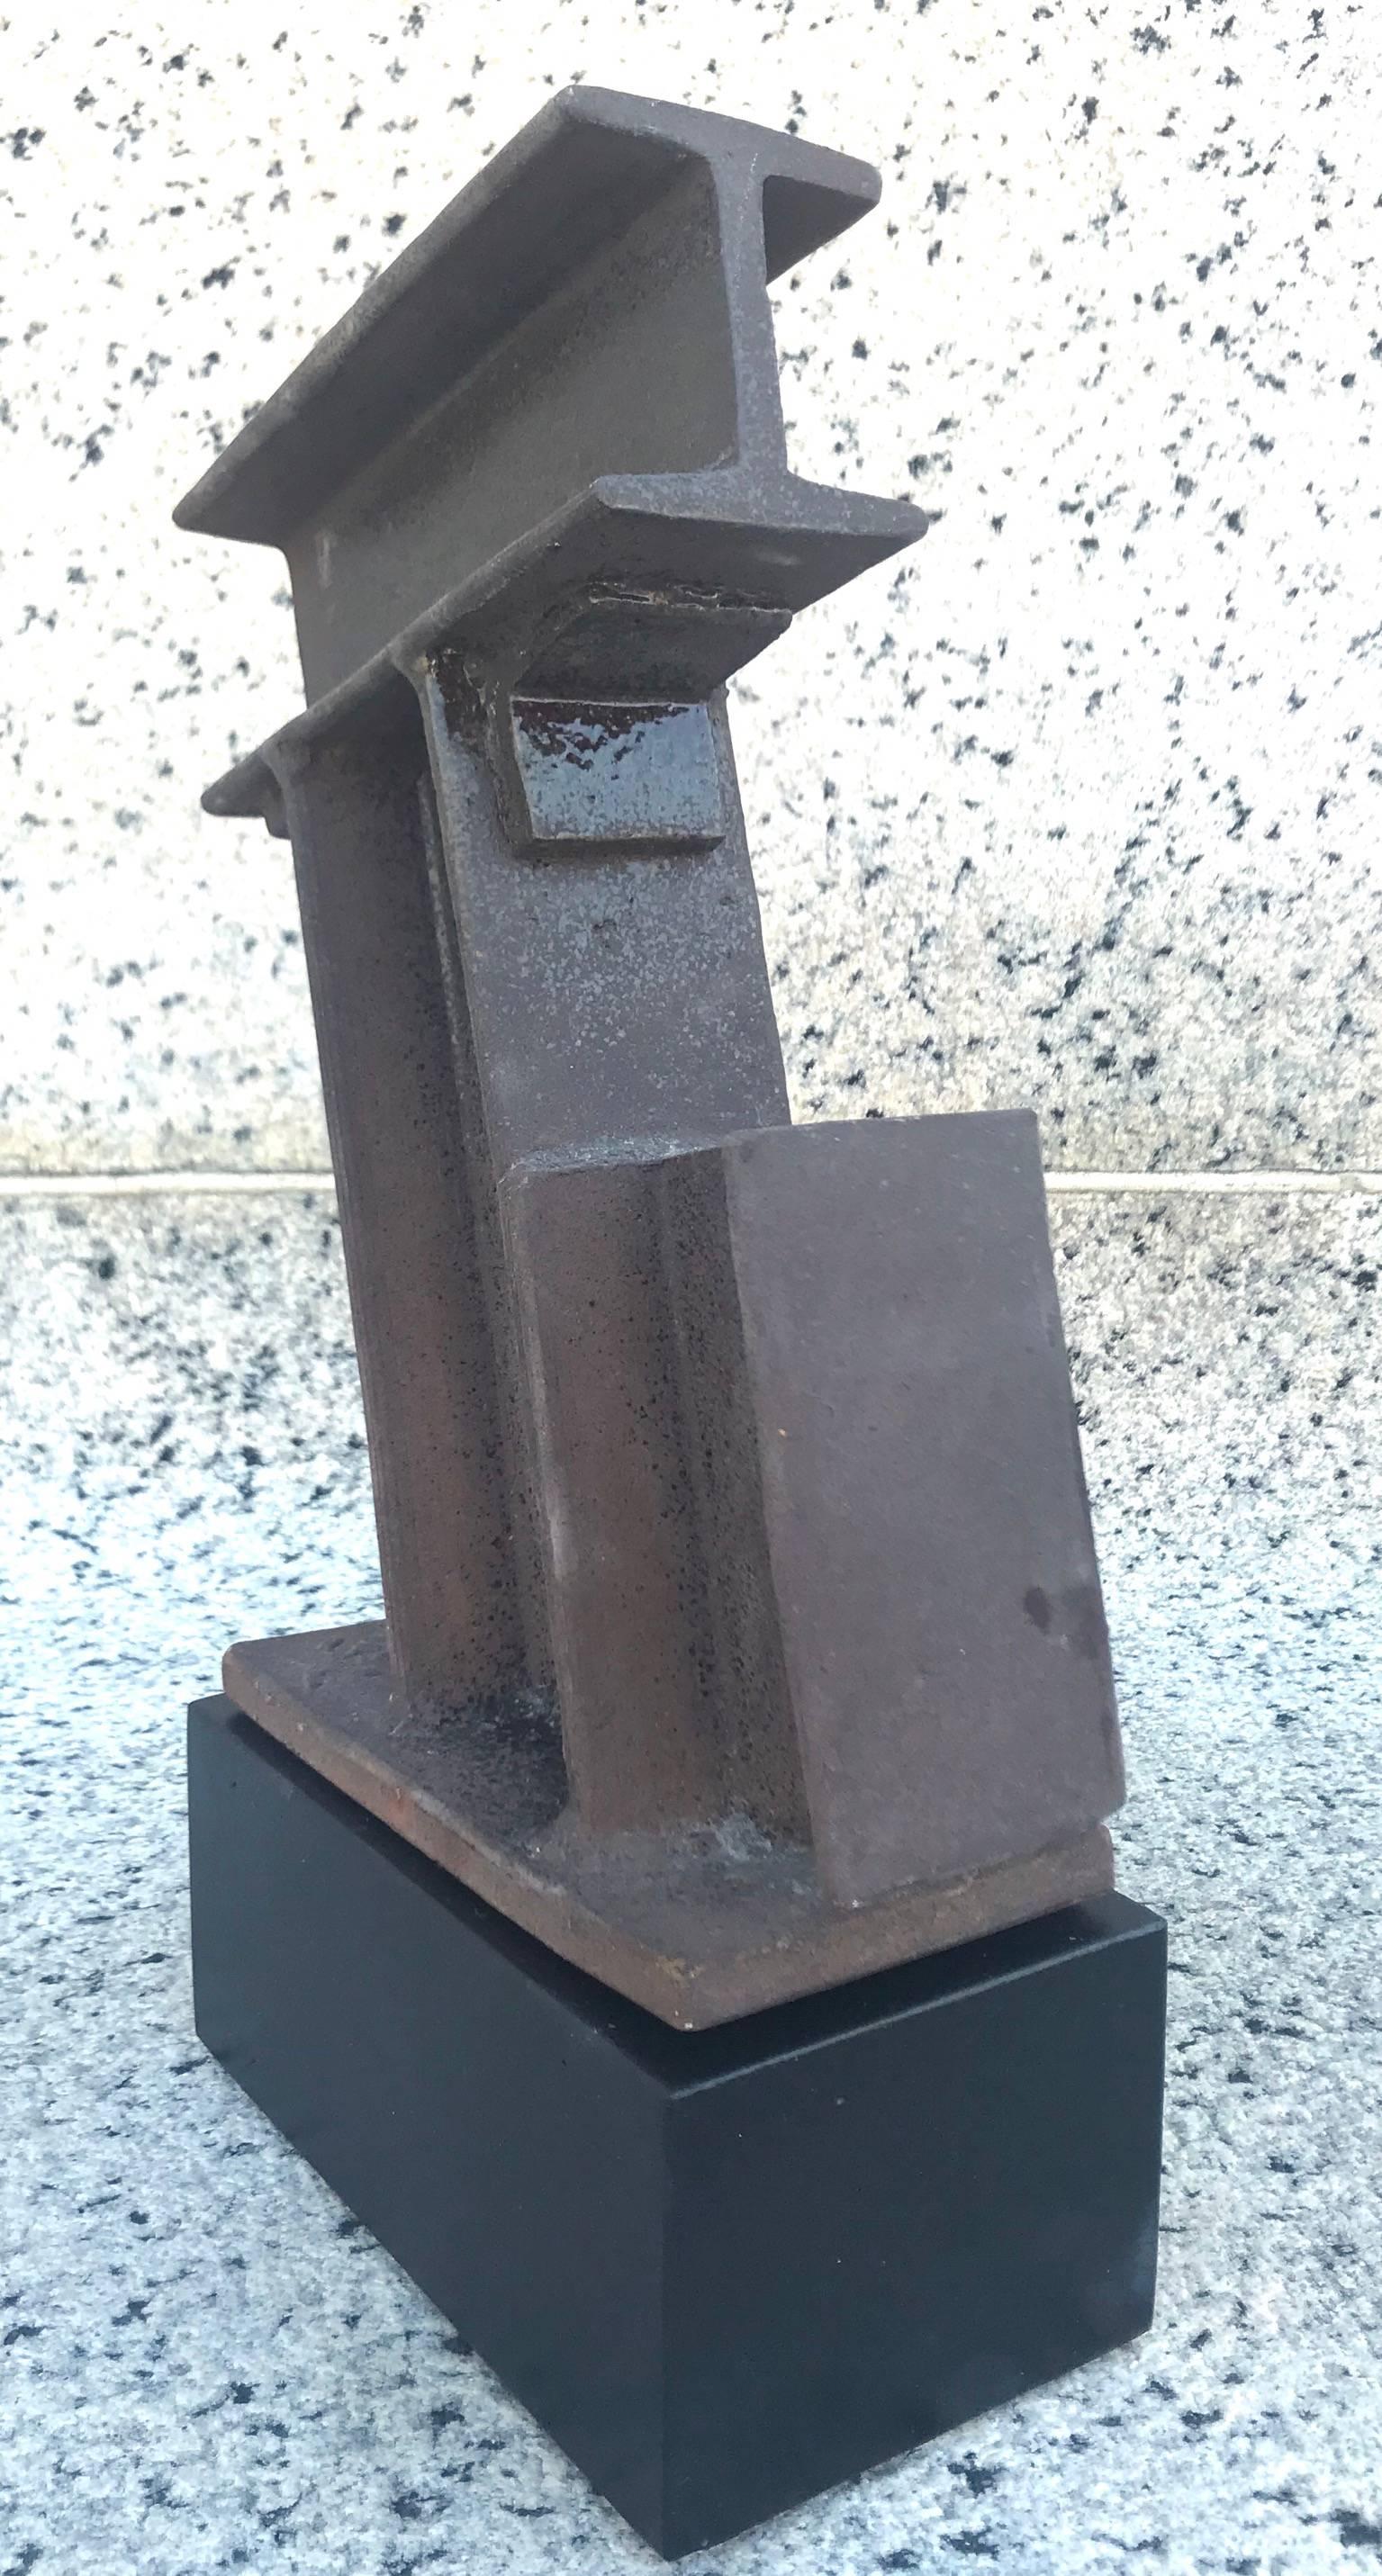 Brutalist Abstract 1970s Ceramic I-Beam Sculpture after Mark Disuvero 3